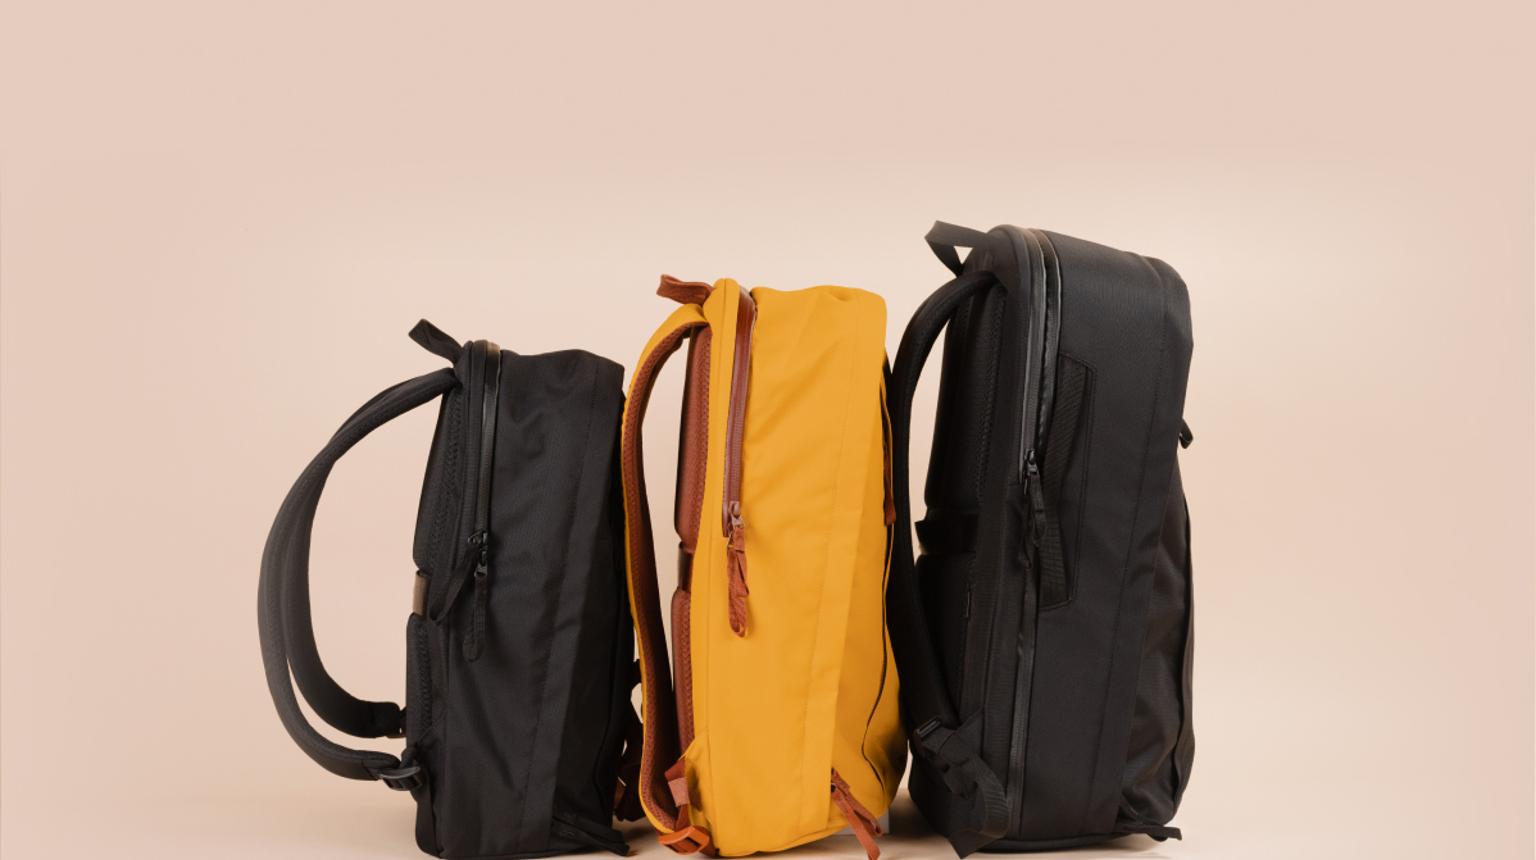 The Everything Backpack | Best Daily Bag for Work, Travel, & Cameras